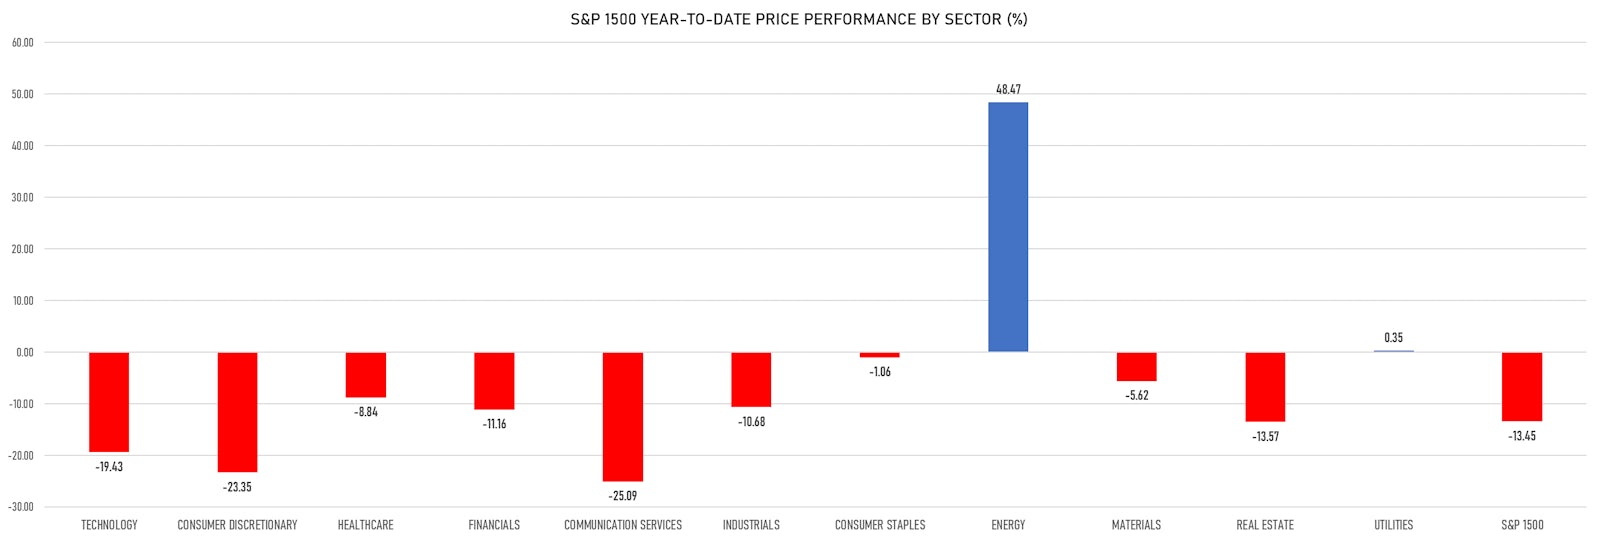 S&P 1500 Price Performance By Sector YTD (%) | Sources: ϕpost, Refinitiv data